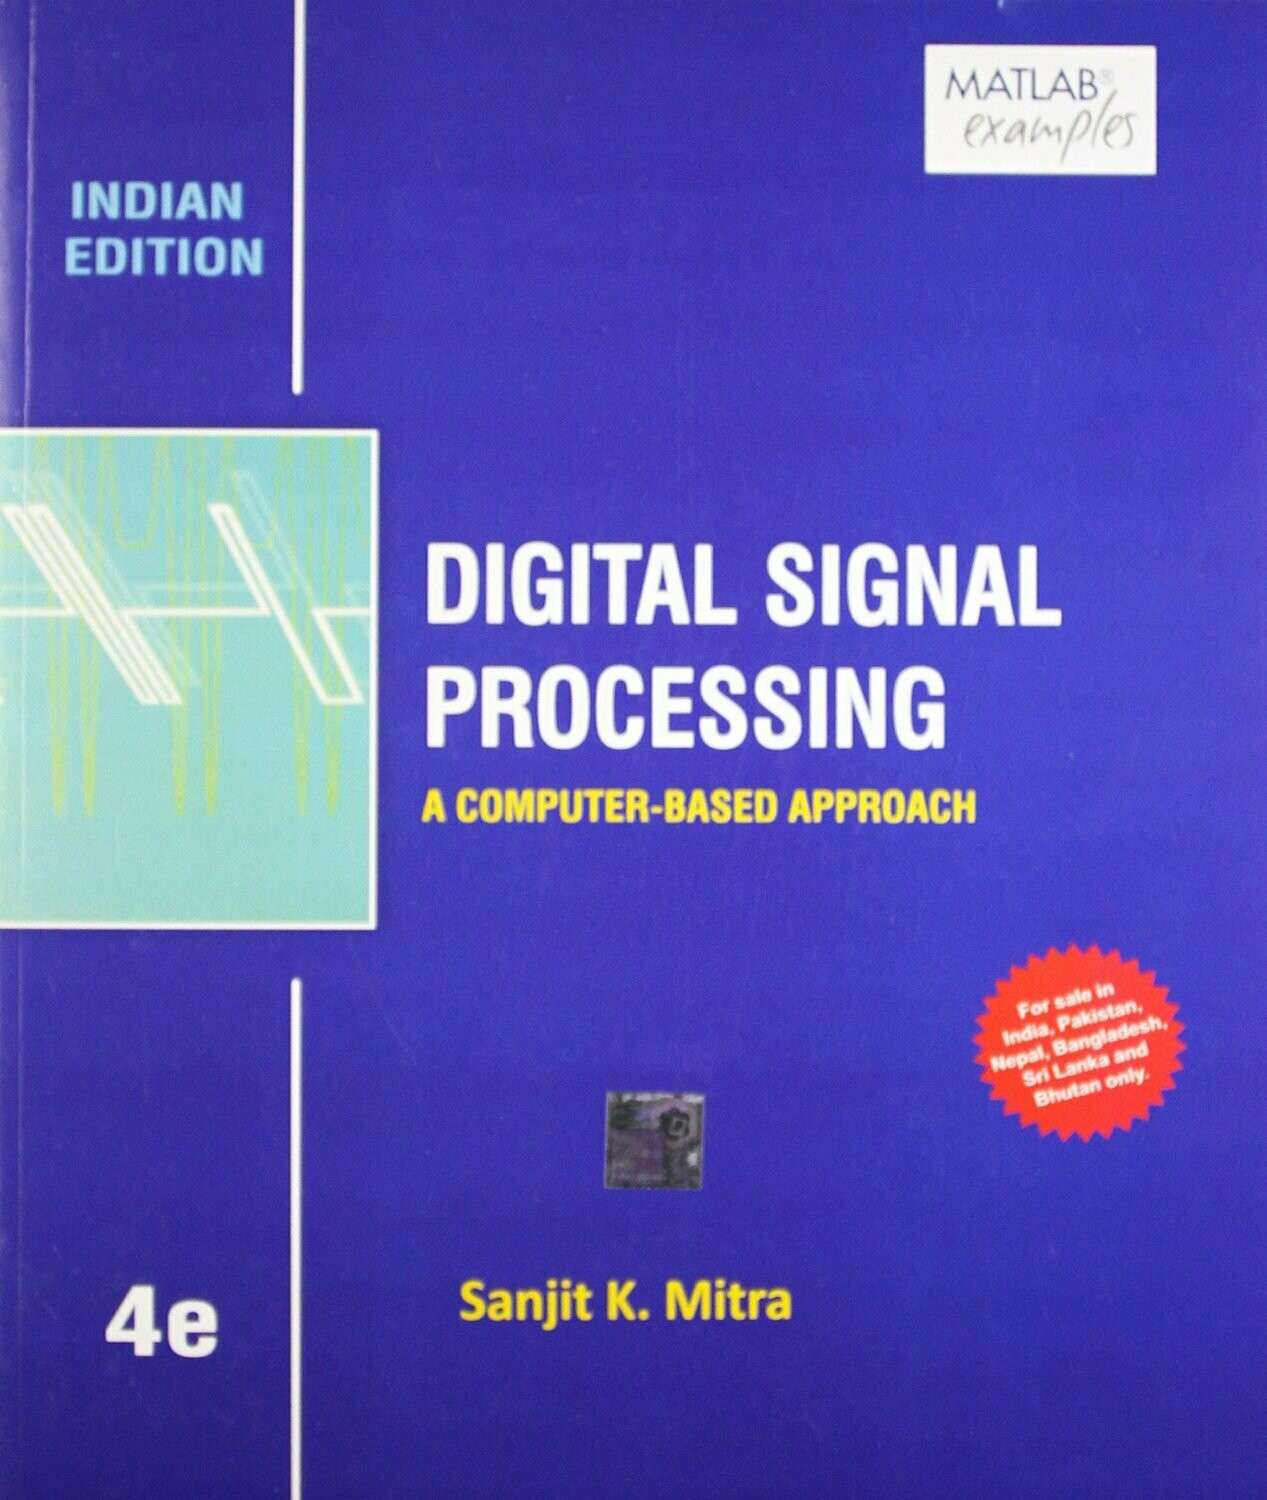 Digital Signal Processing A Computer - Based Approach Paperback by Sanjit K. Mitra (Author)| Pustakkosh.com